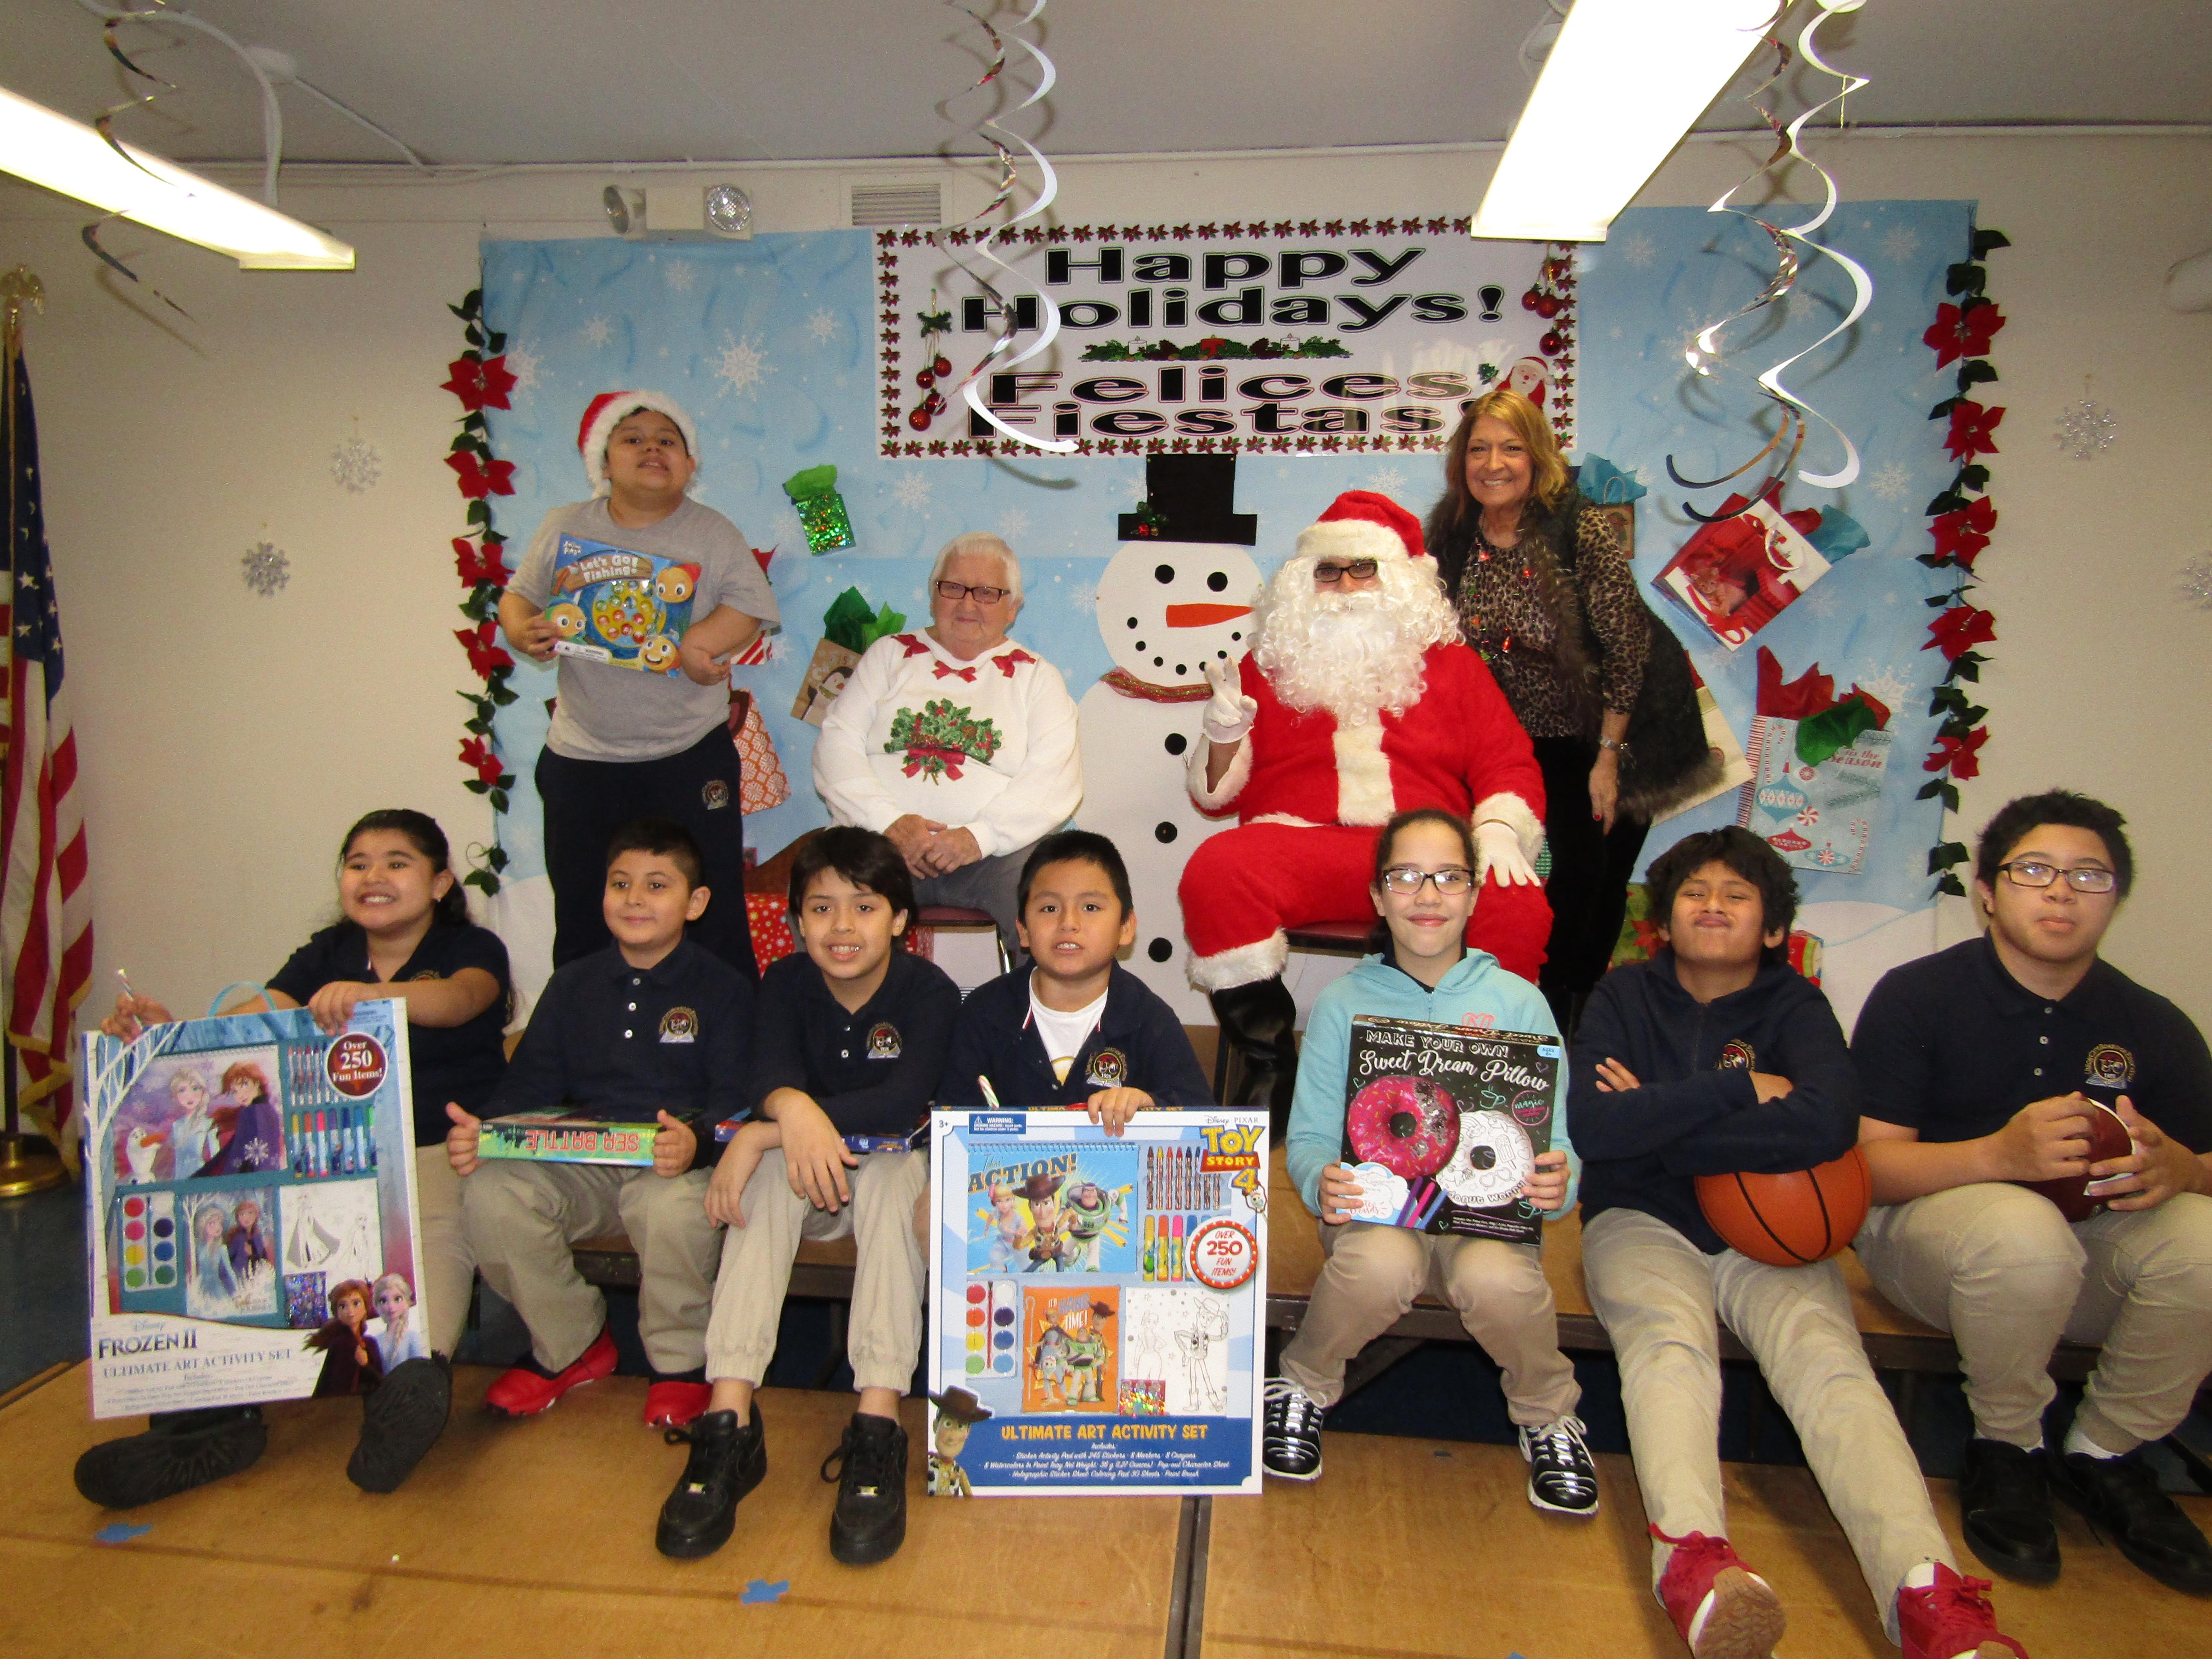 3rd grade class with their gifts from Santa